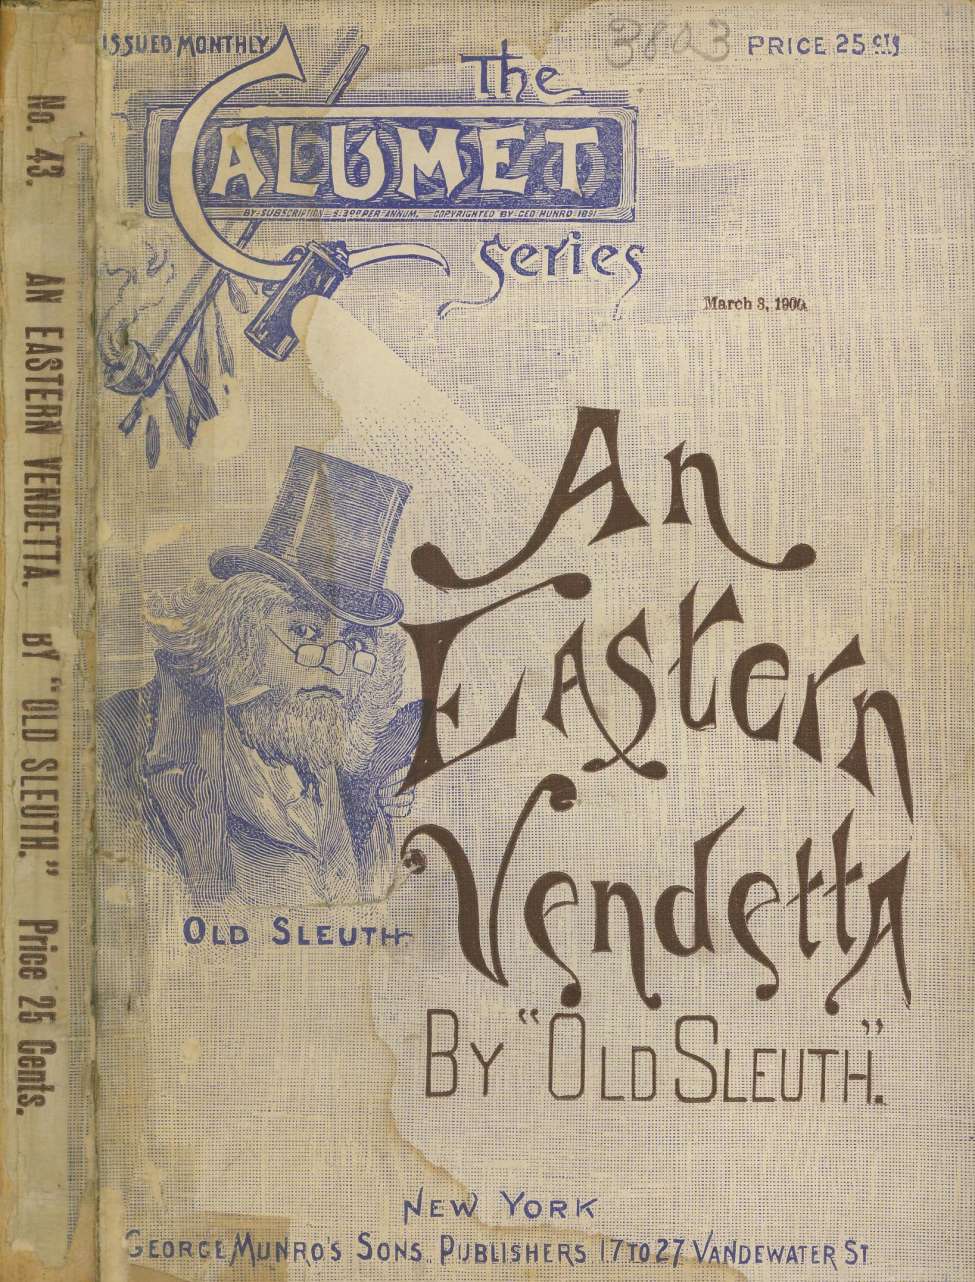 Comic Book Cover For An Eastern Vendetta by Old Sleuth